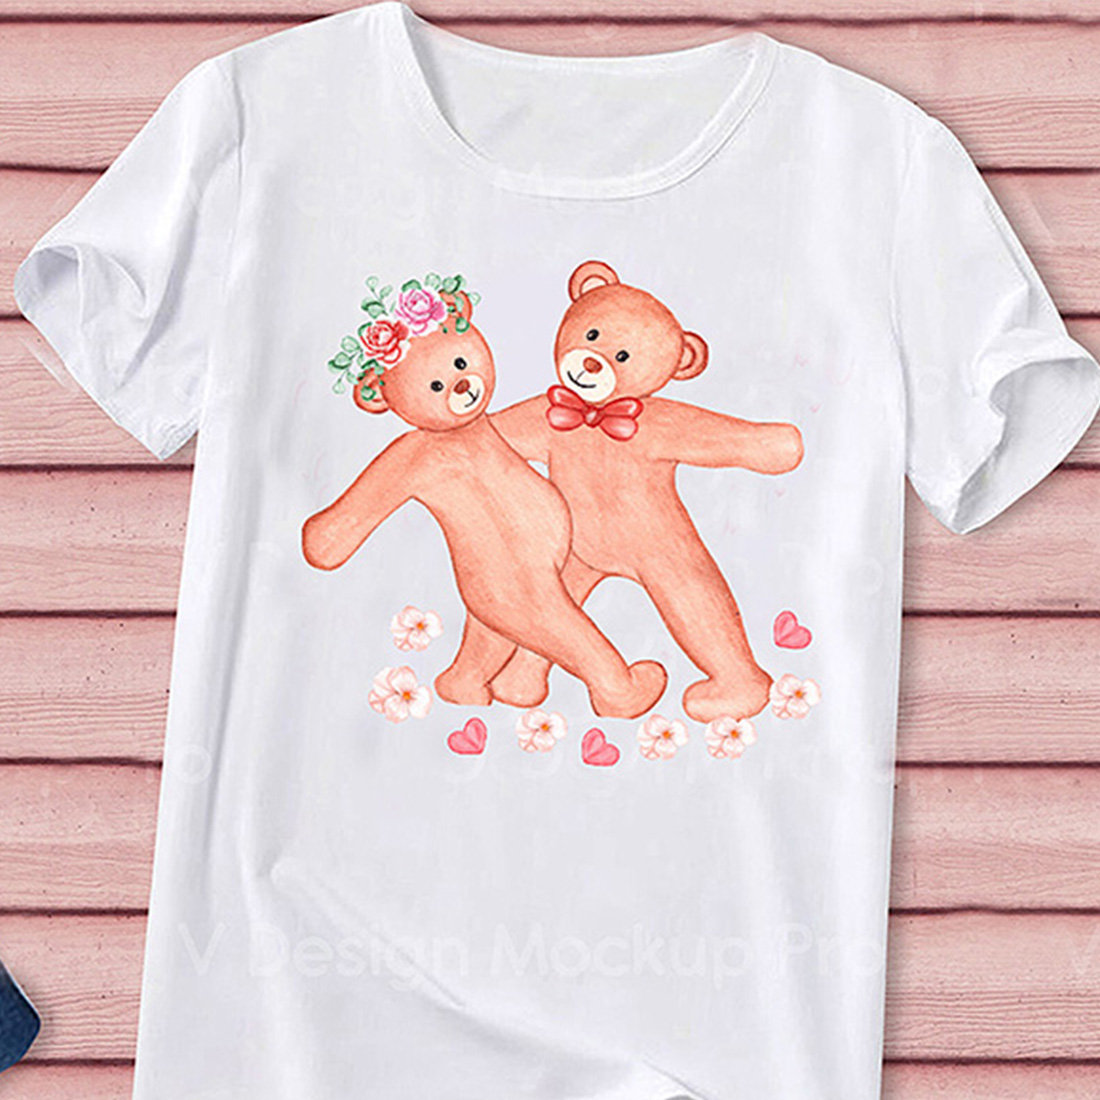 Image of a T-shirt with a beautiful print of a couple of bears